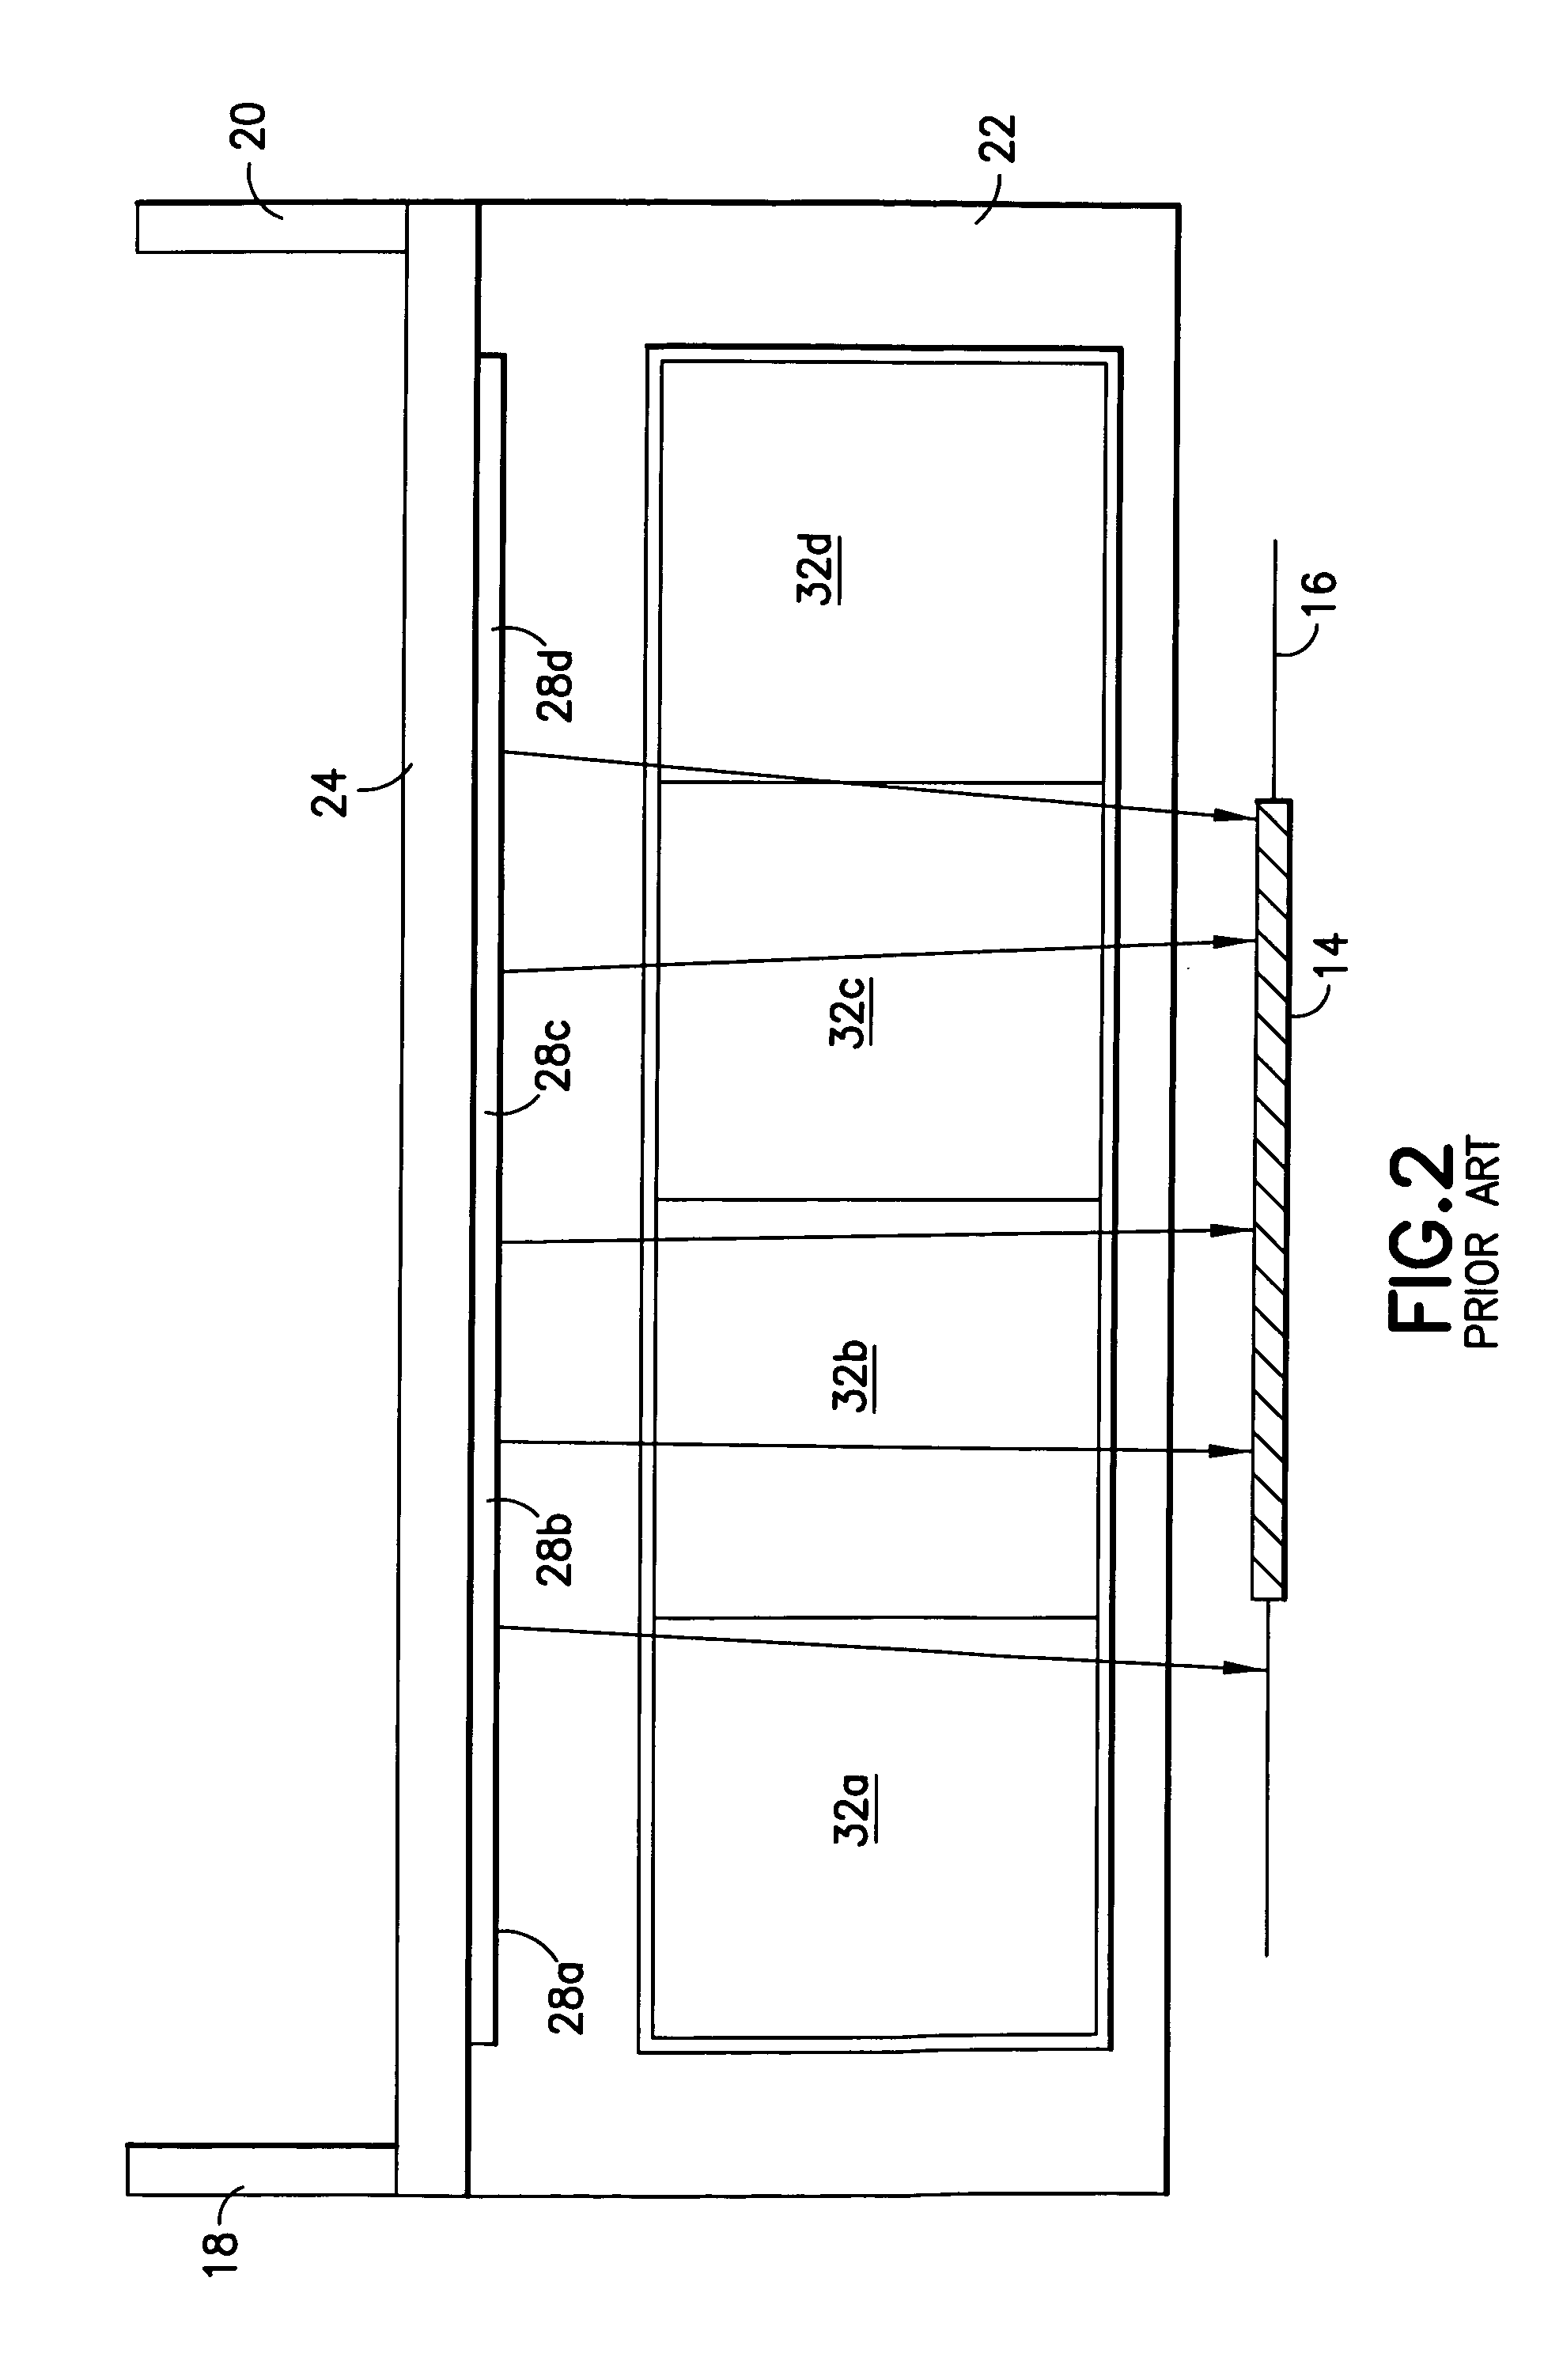 Apparatus for heating and curing powder coatings on porous wood products